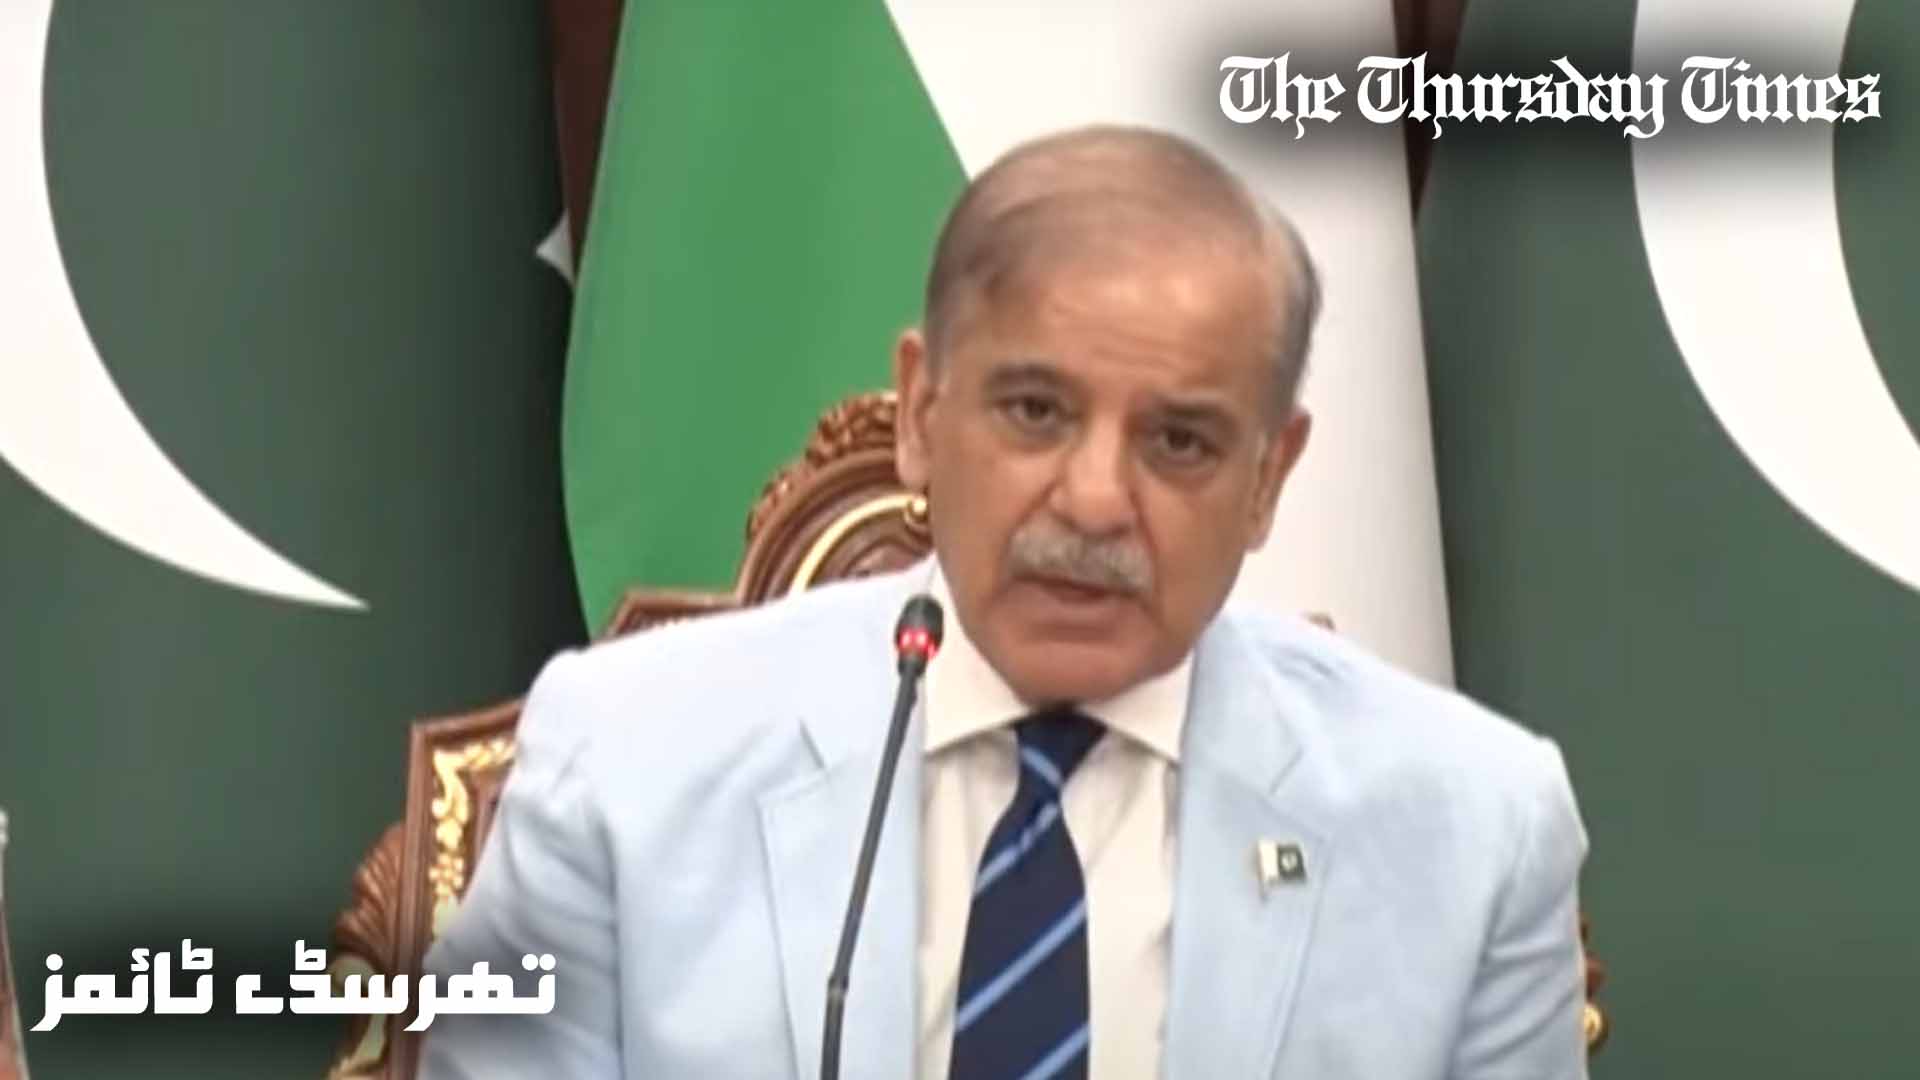 A file photo is shown of incumbent prime minister of Pakistan, Shehbaz Sharif addressing during a visit to Tajikistan. — FILE/THE THURSDAY TIMES